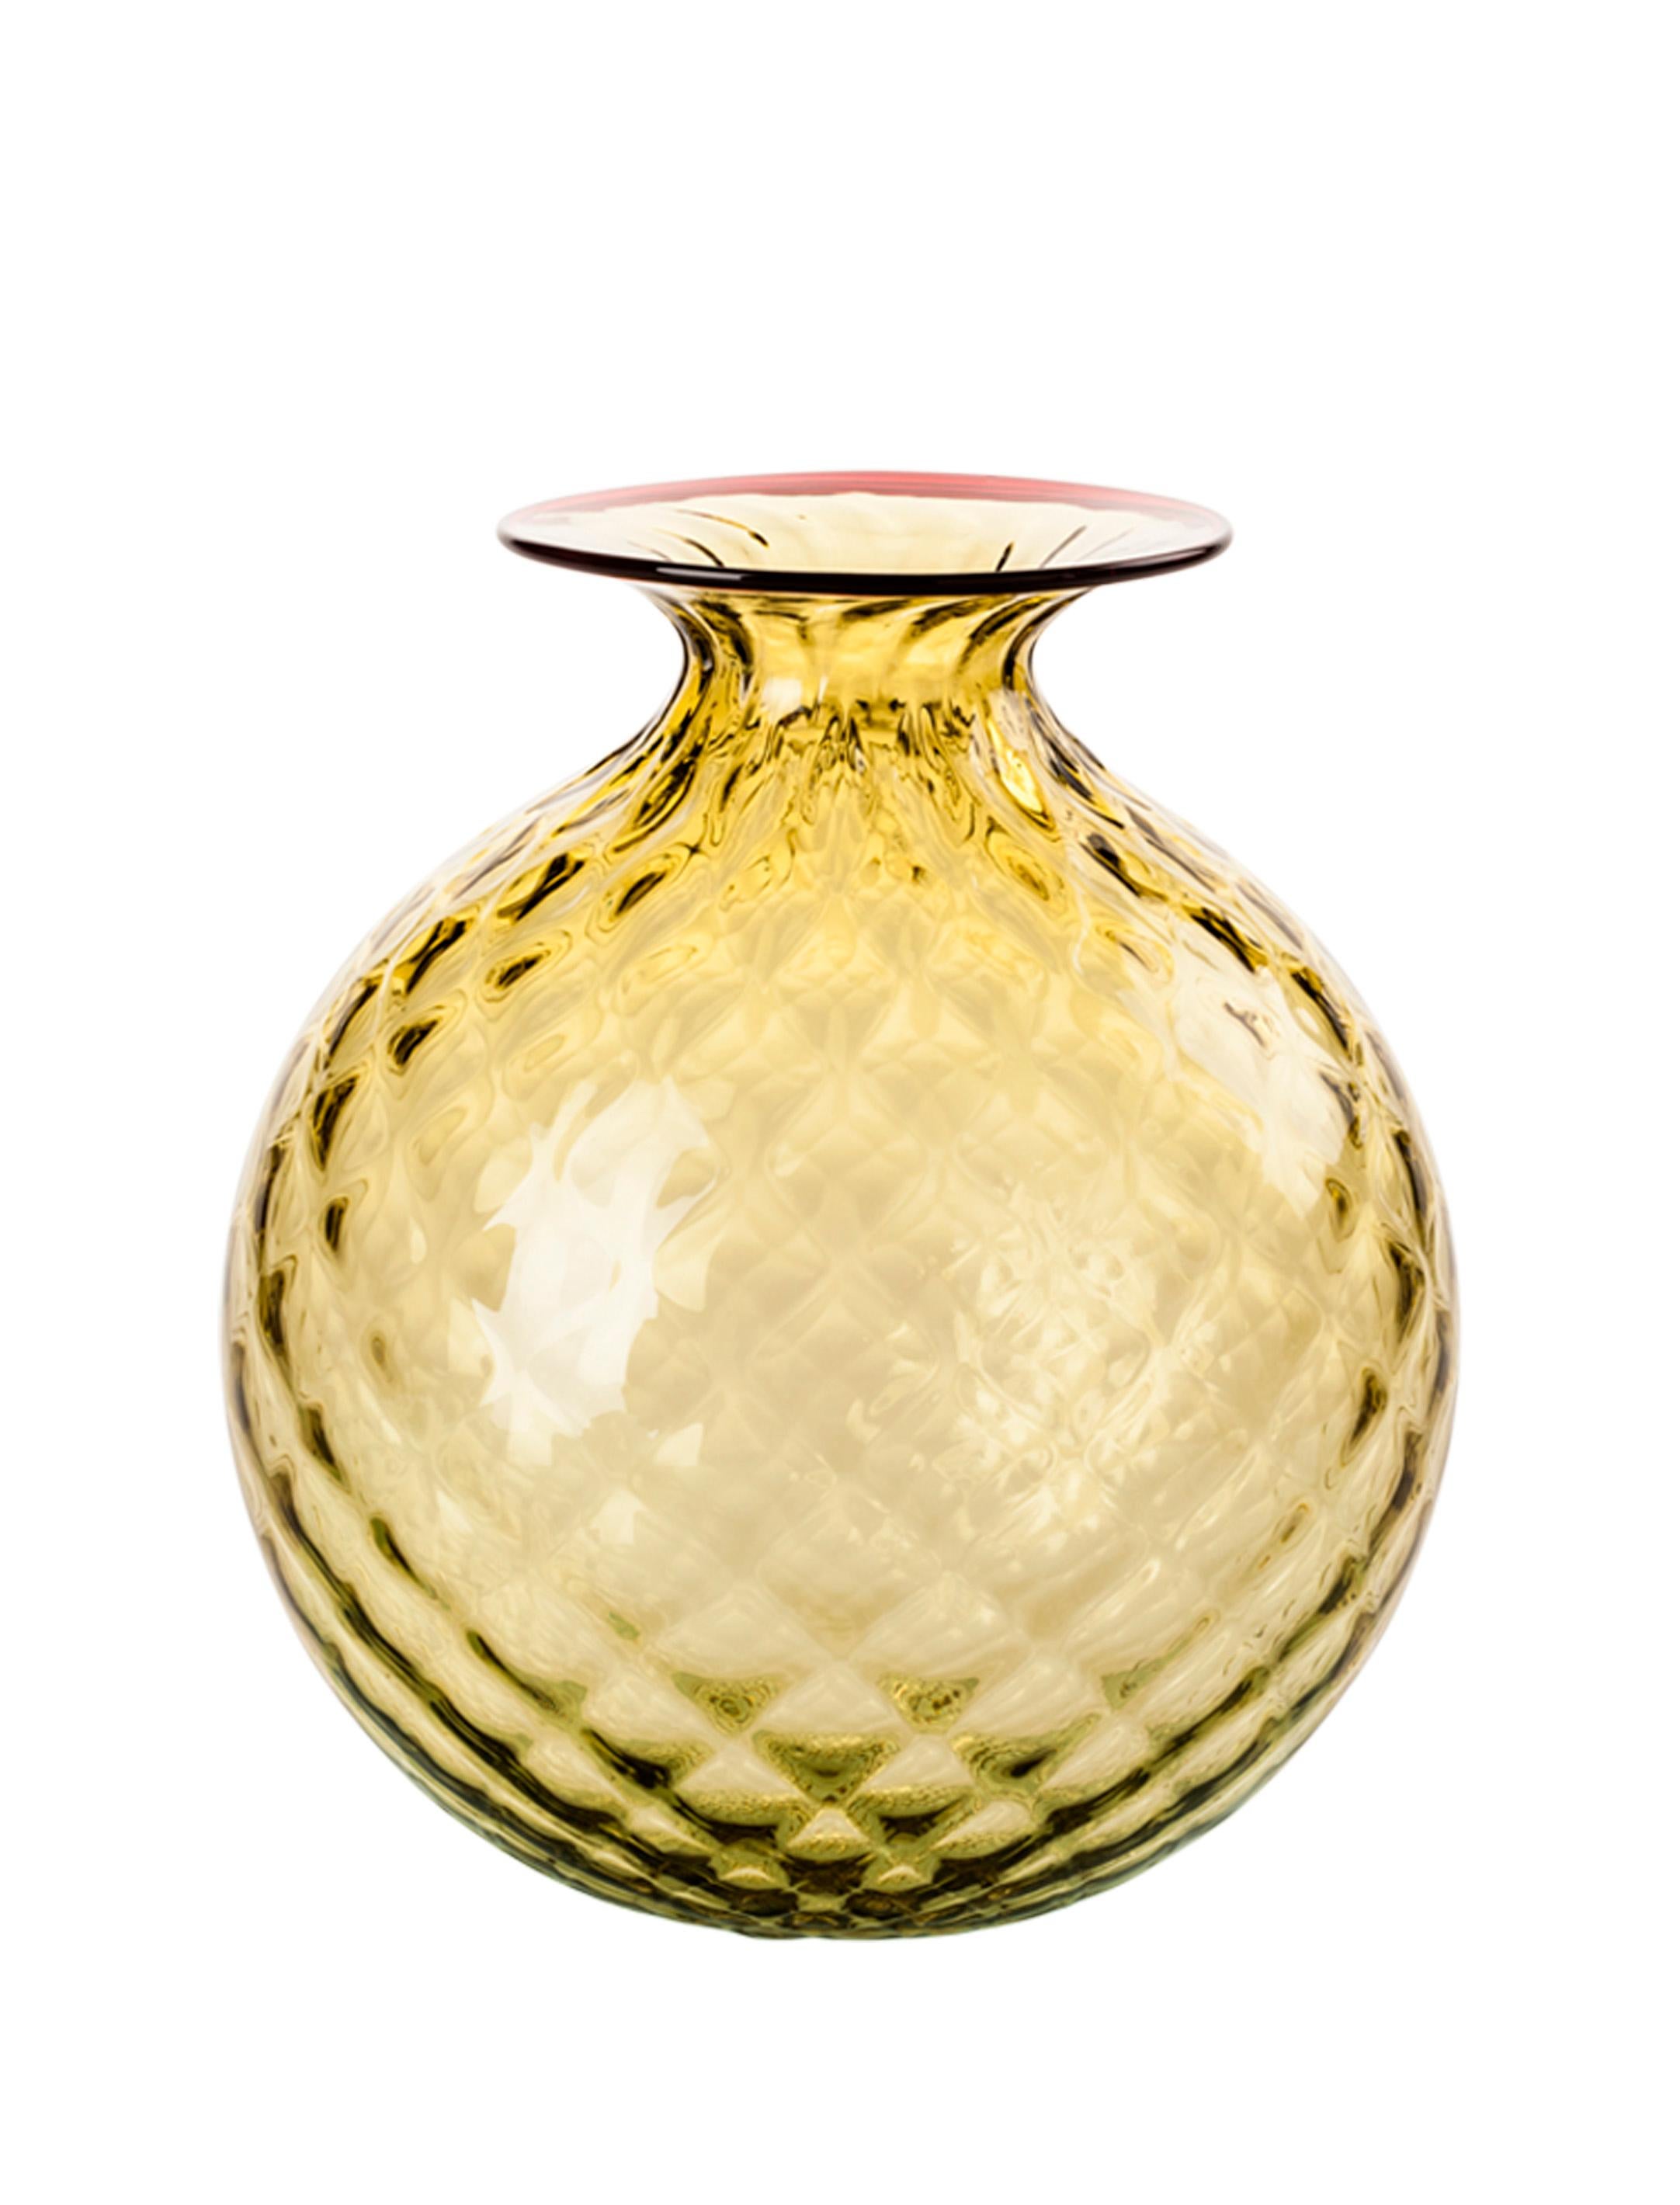 Venini glass vase with full body and textured surface with hexagonal shaped pattern in bamboo designed in 1970. Perfect for indoor home decor as container or strong statement piece for any room. Also available in other colors on 1stdibs. Limited